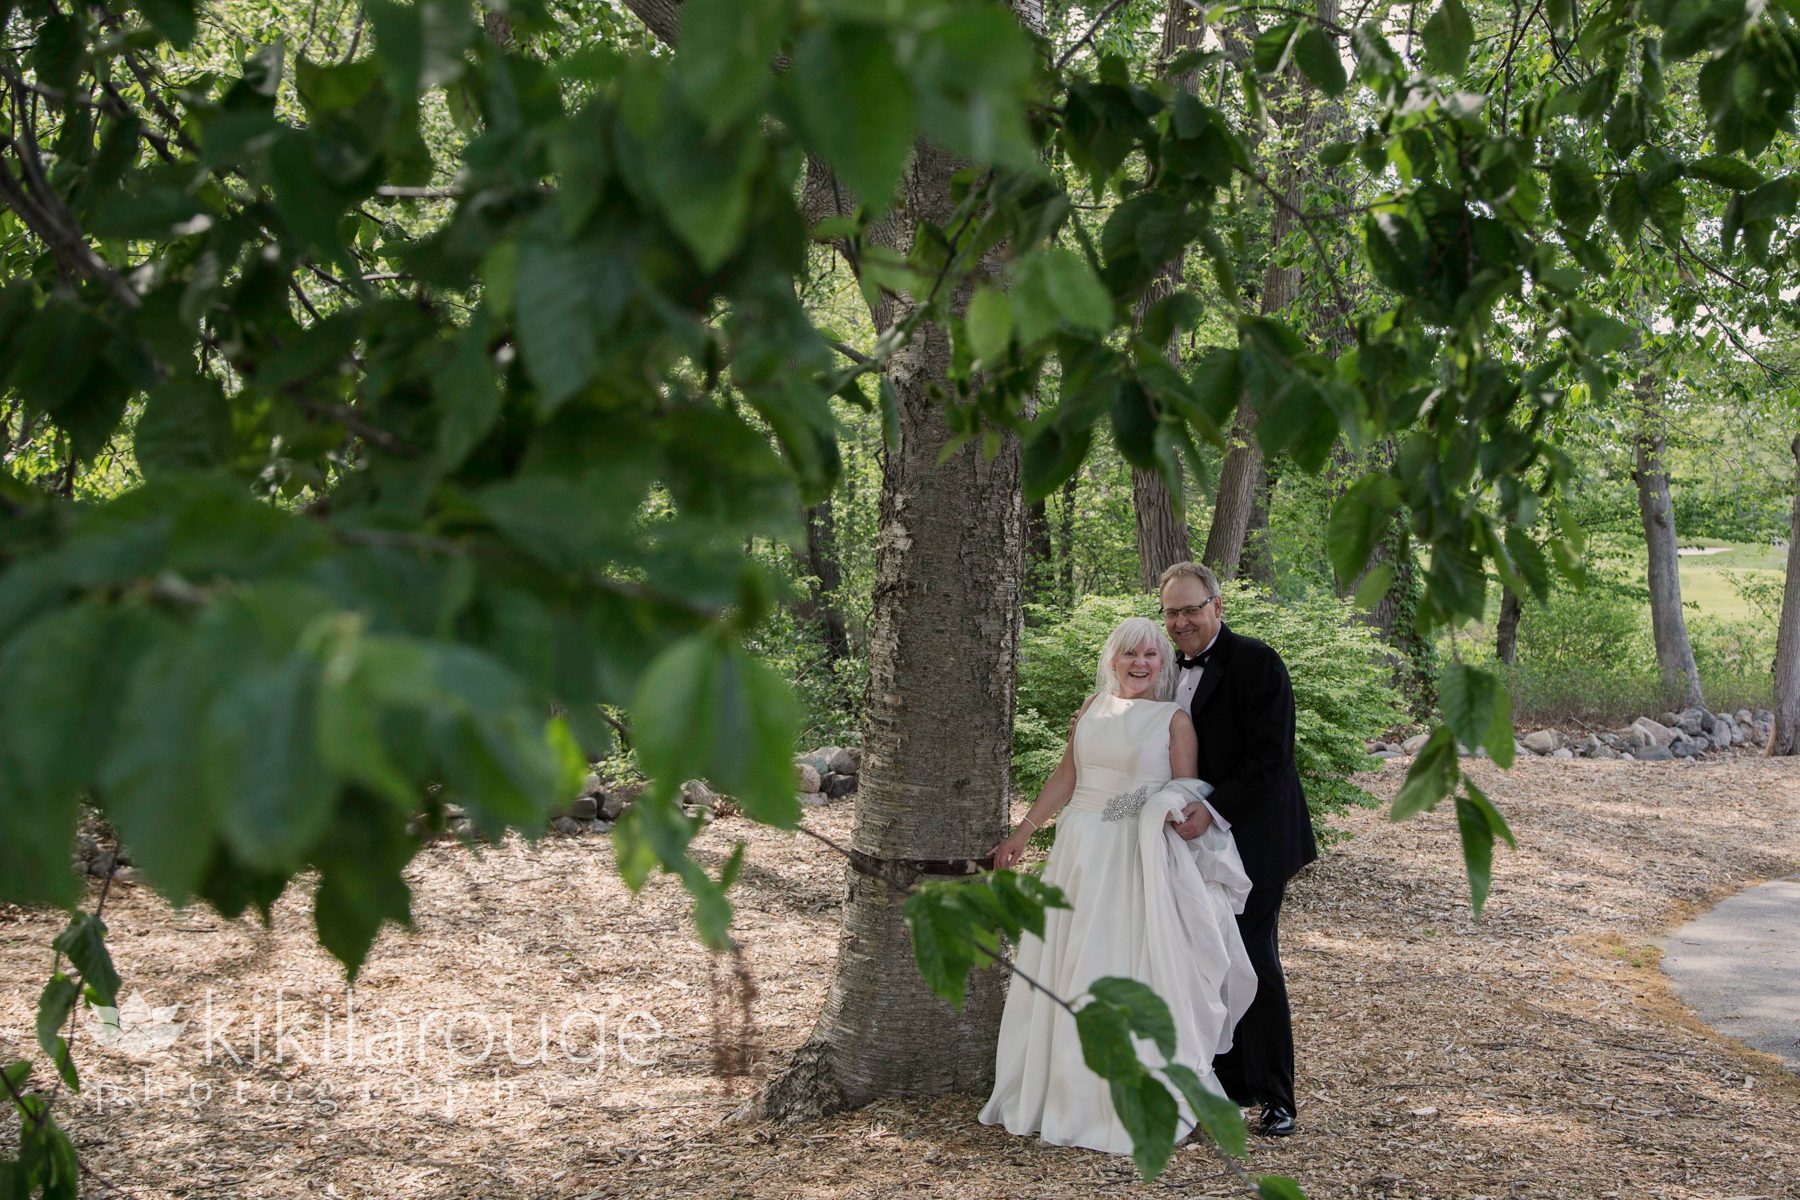 Wedding couple woods surrounded by greenery